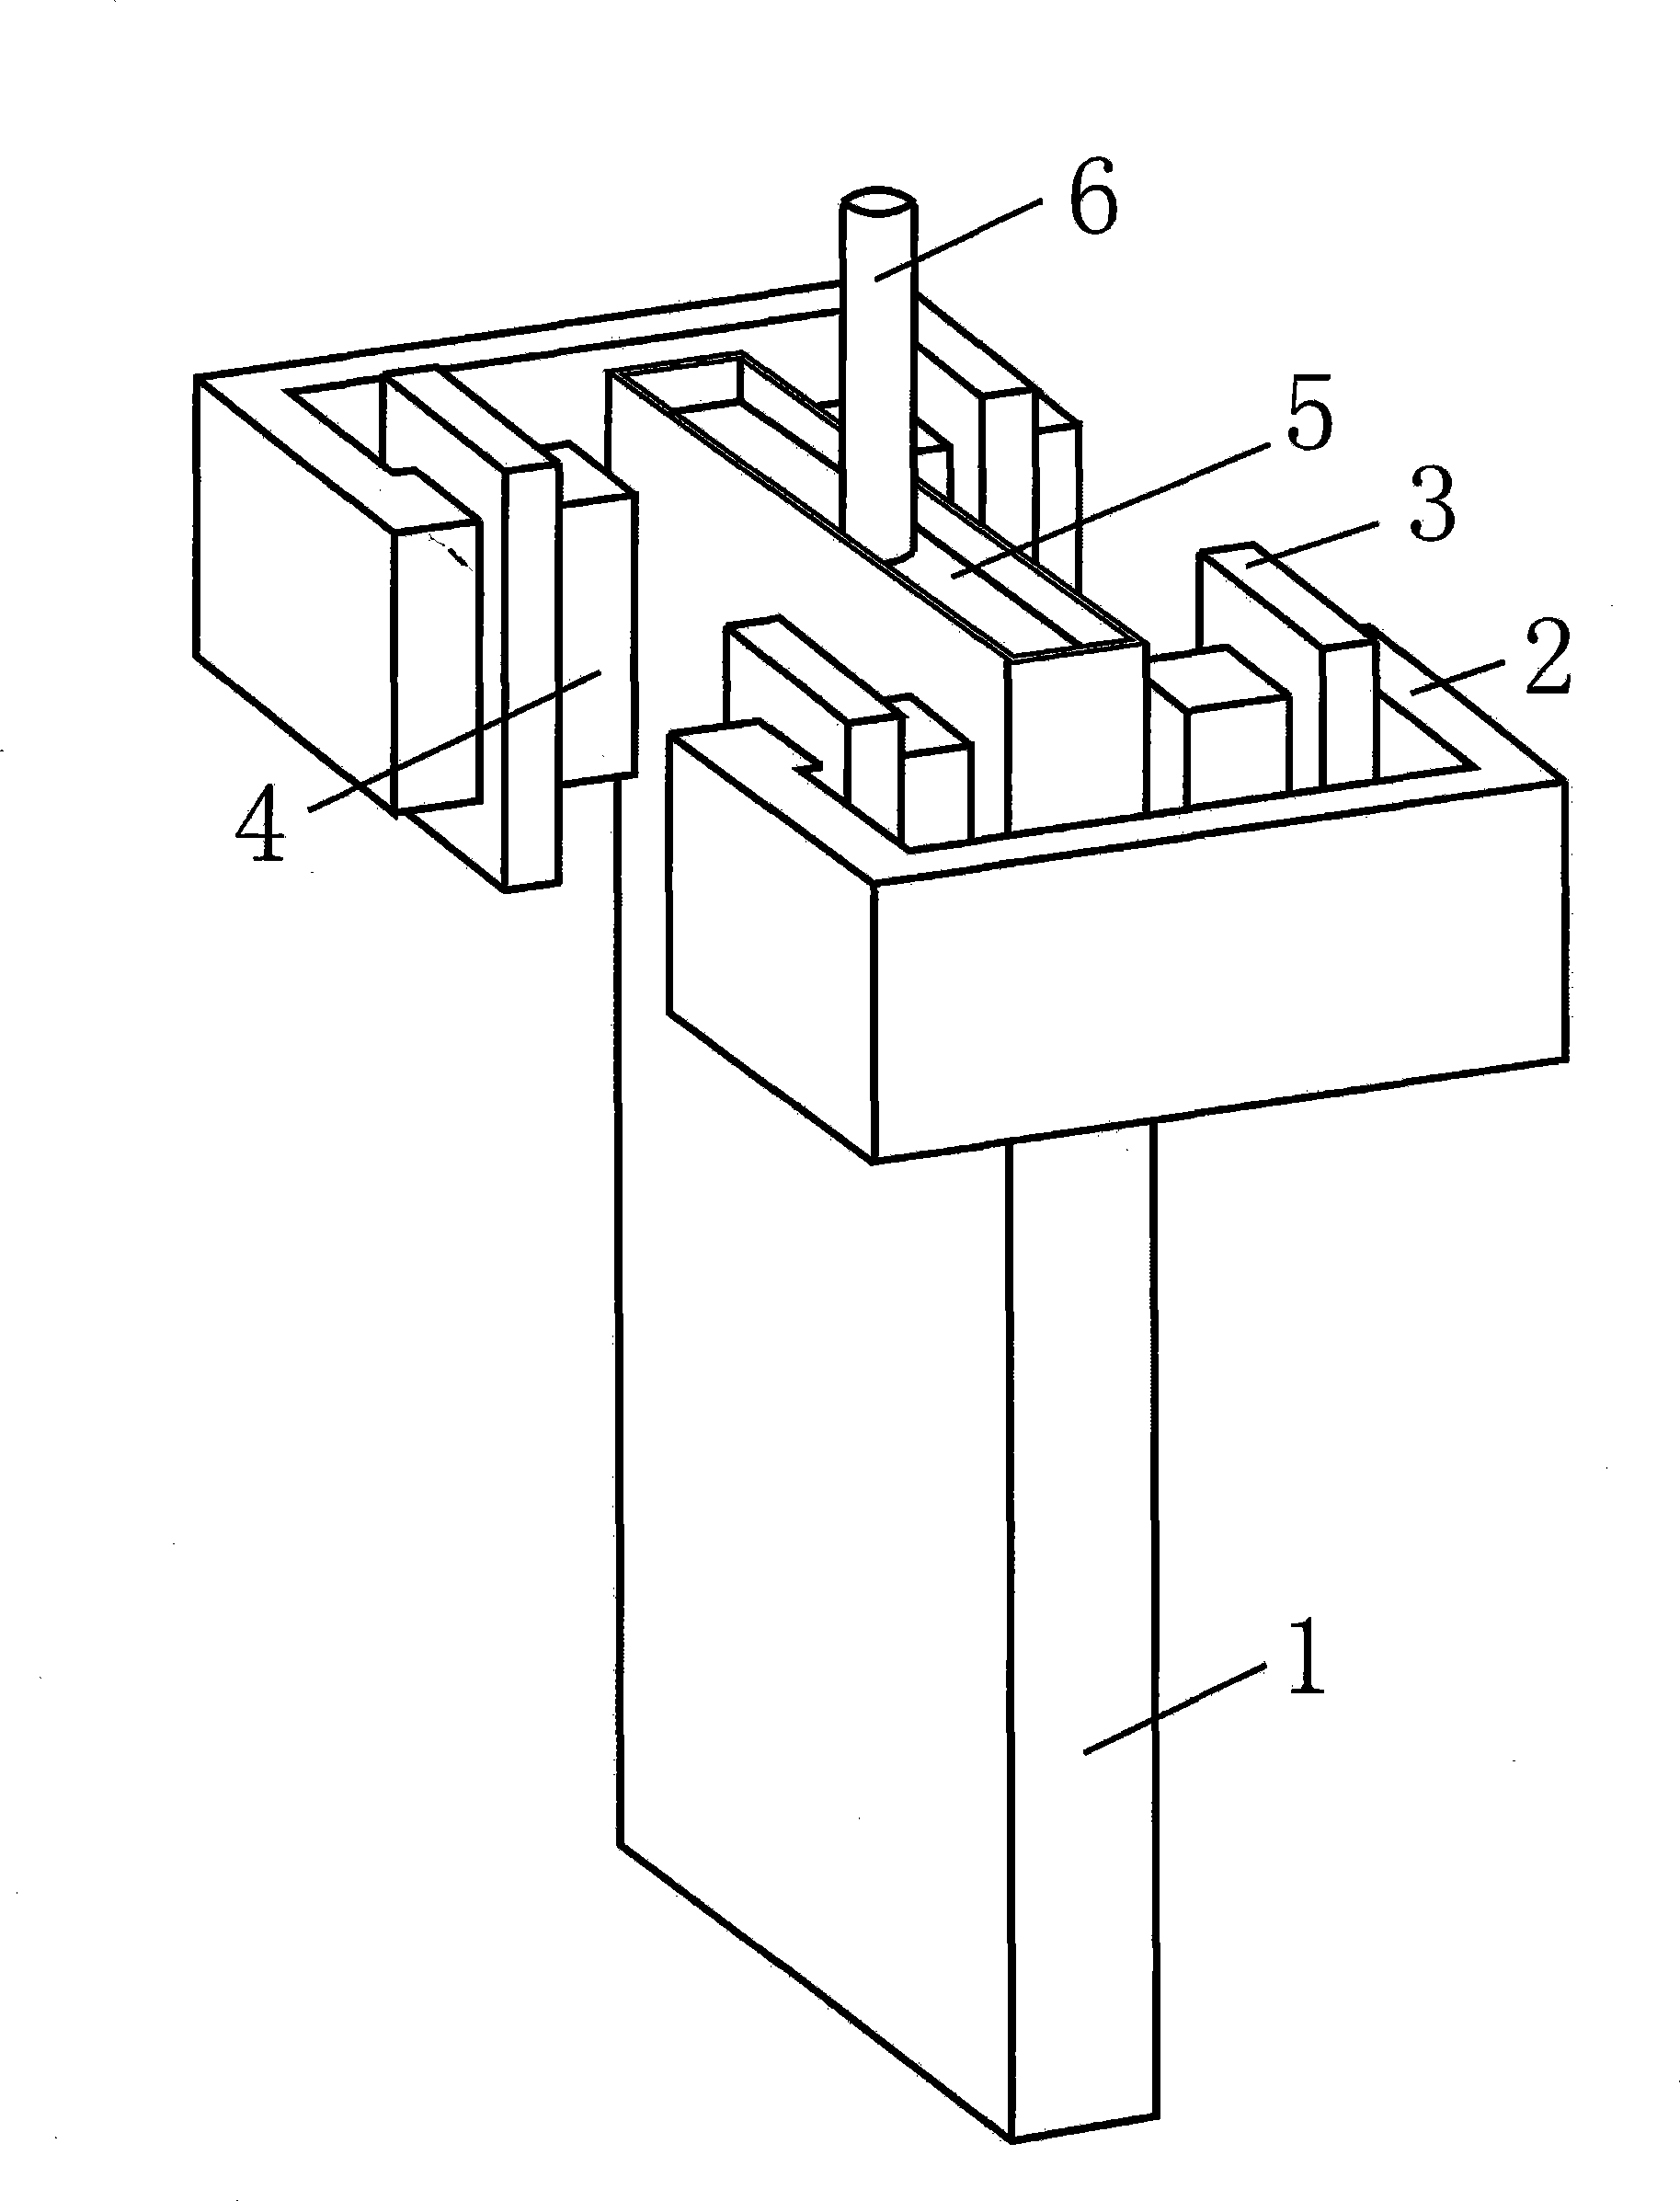 Electro-magnetic braking device for controlling molten metal flow in continuous cast crystallizer